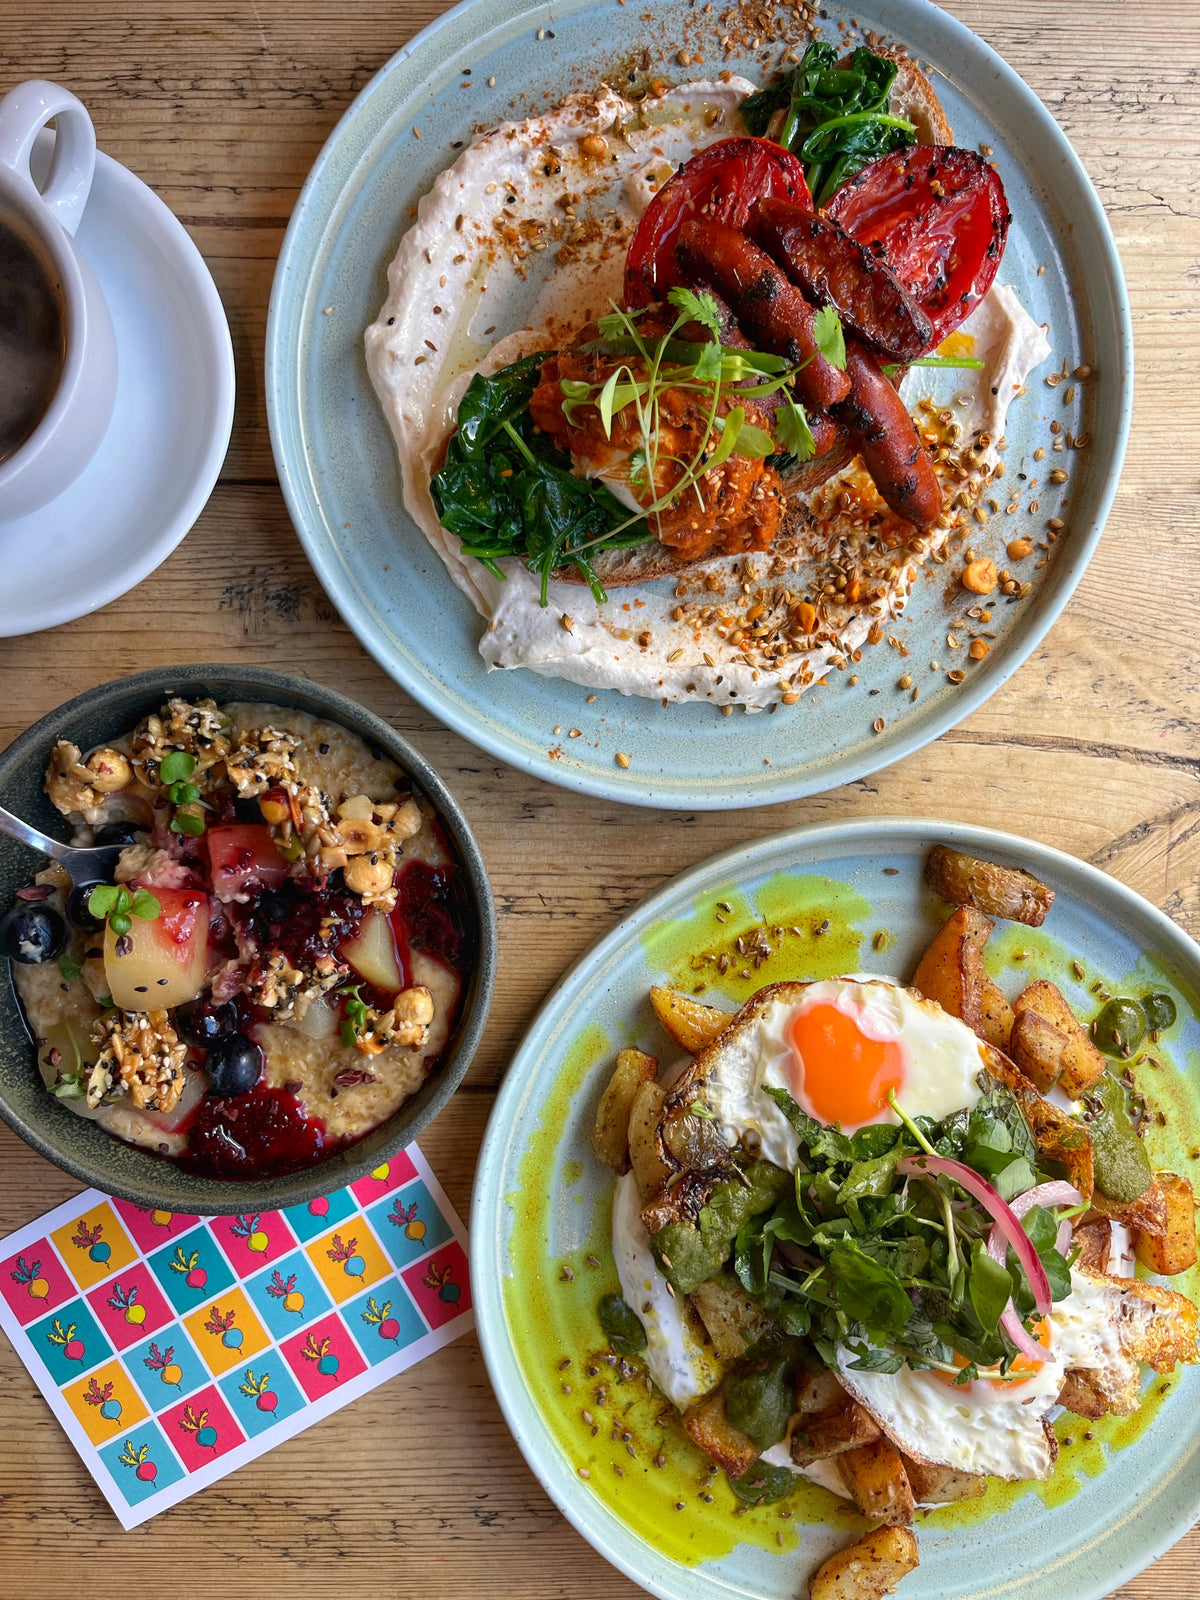 An image showing some of our popular brunch dishes: chorizo brunch, masala potatoes and porridge.